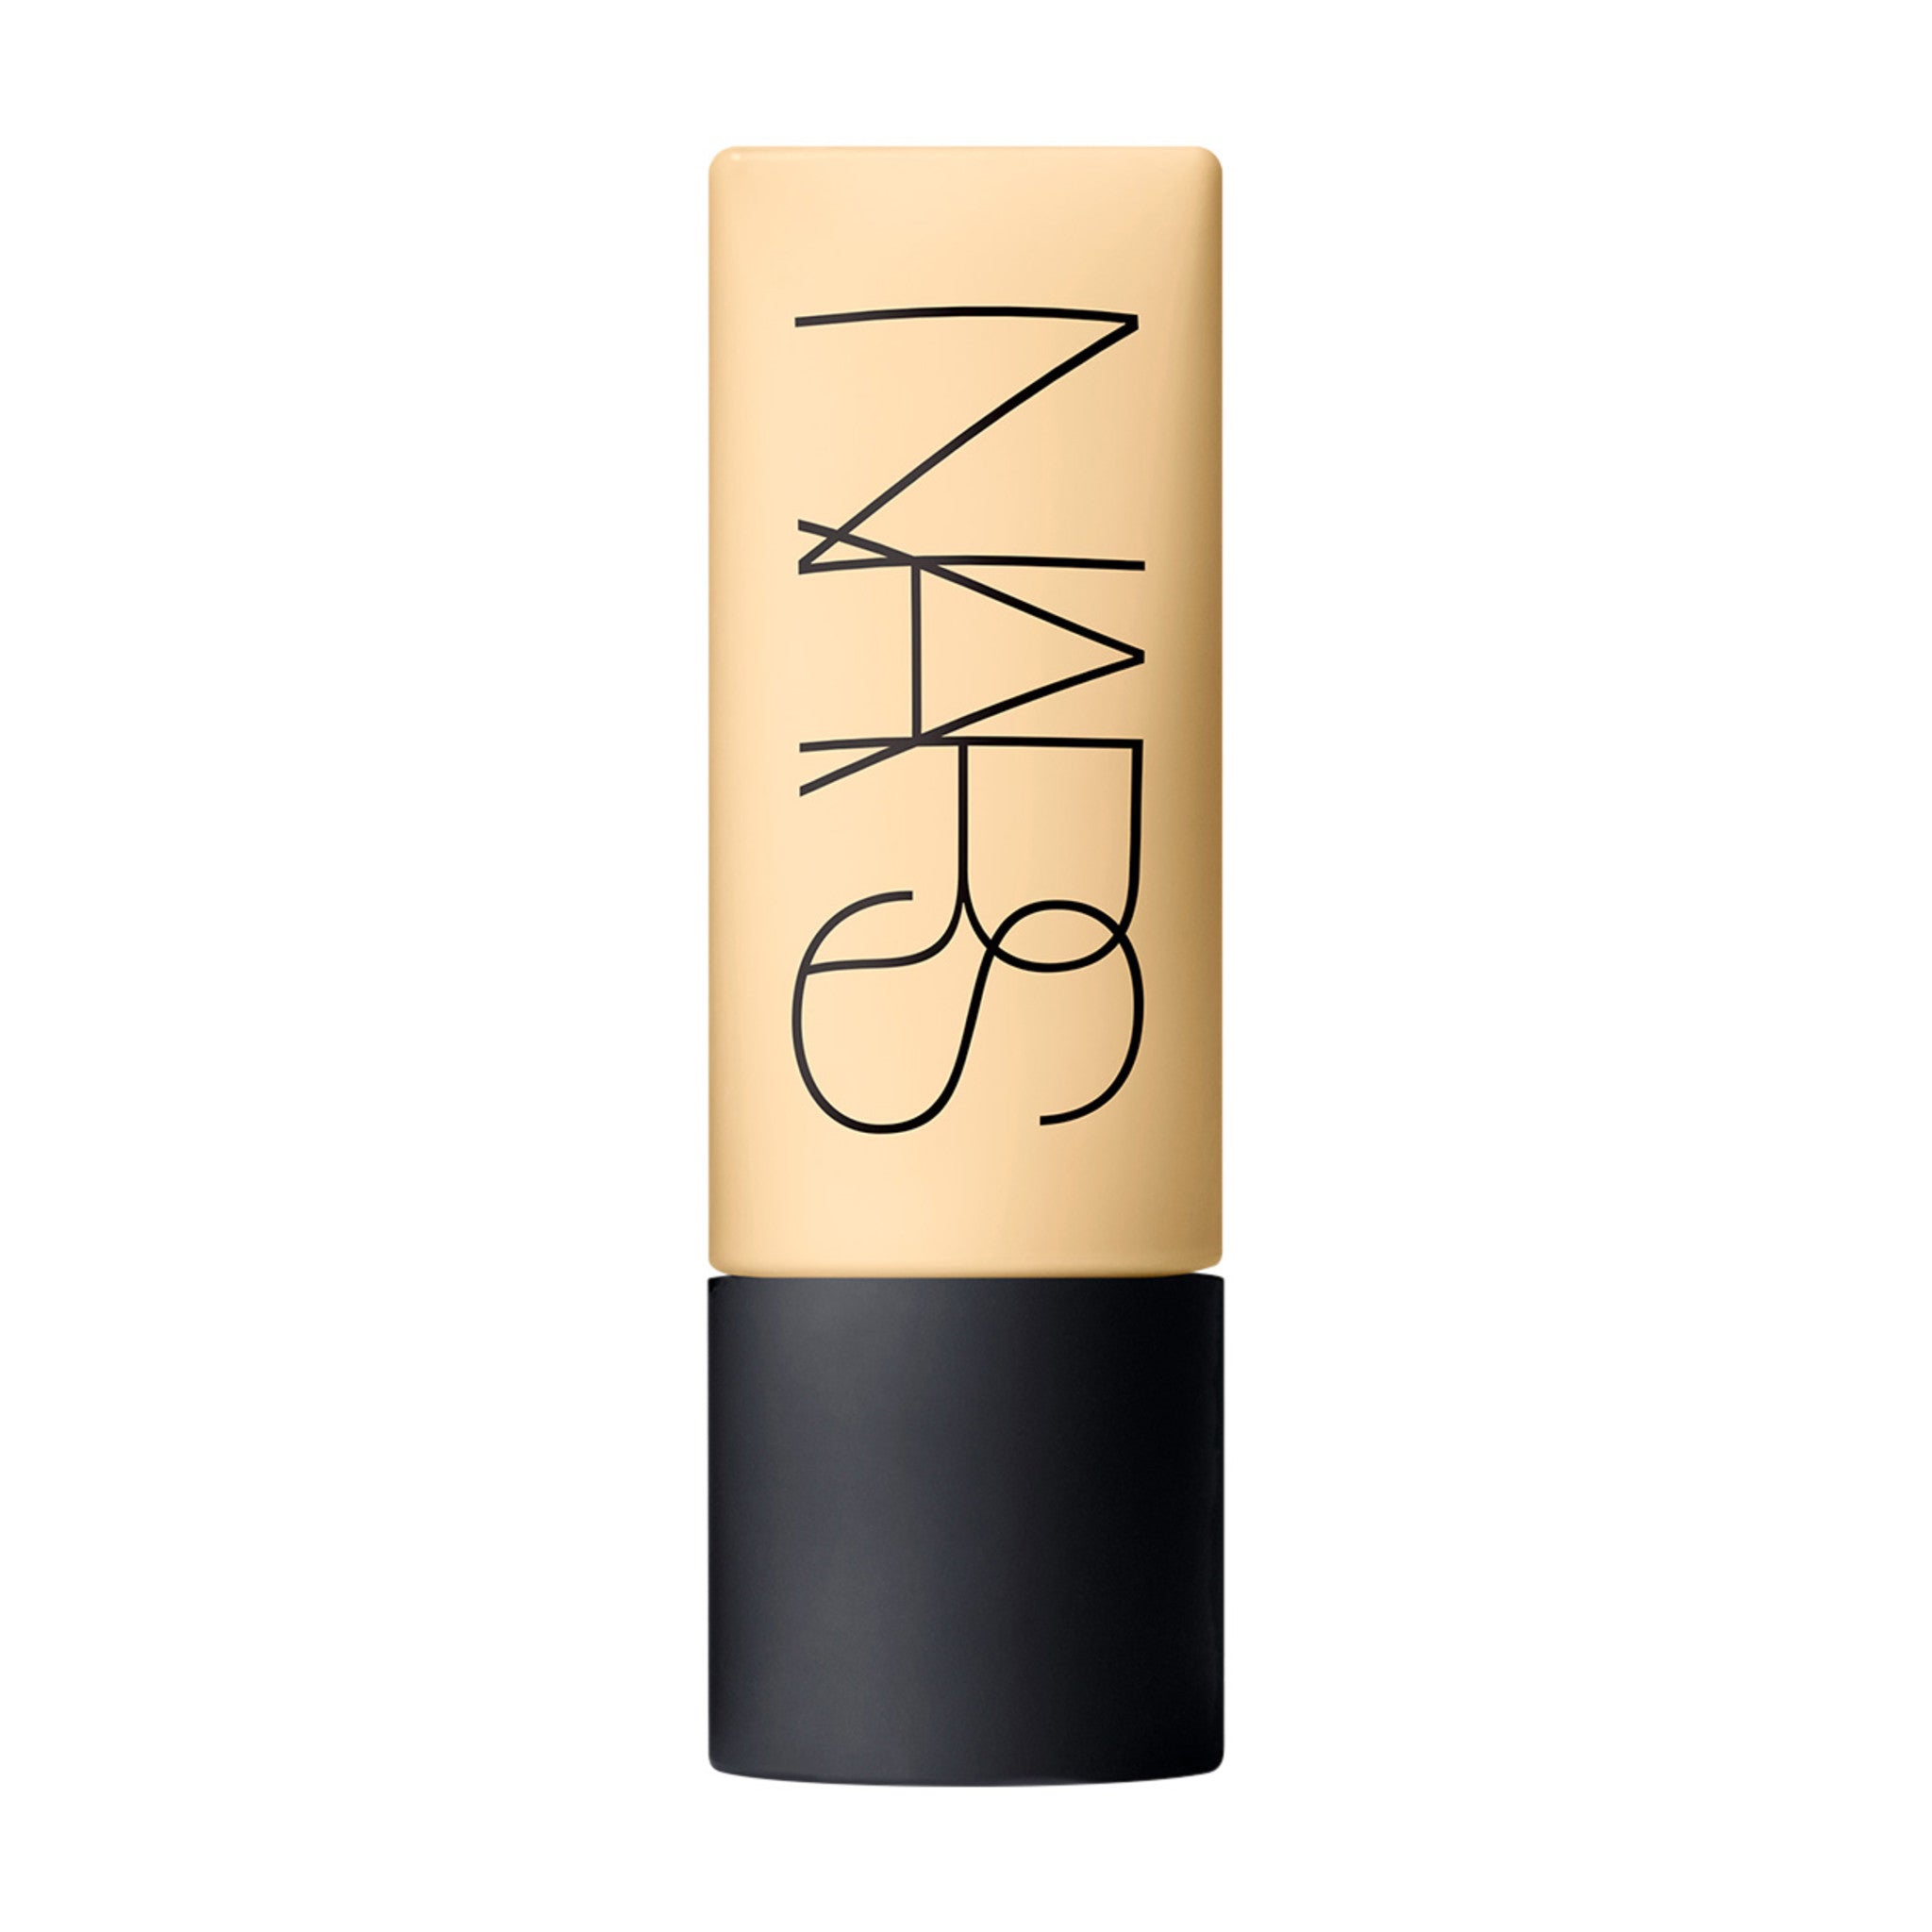 Nars Soft Matte Complete Foundation Color/Shade variant: Gobi main image. This product is for light neutral complexions